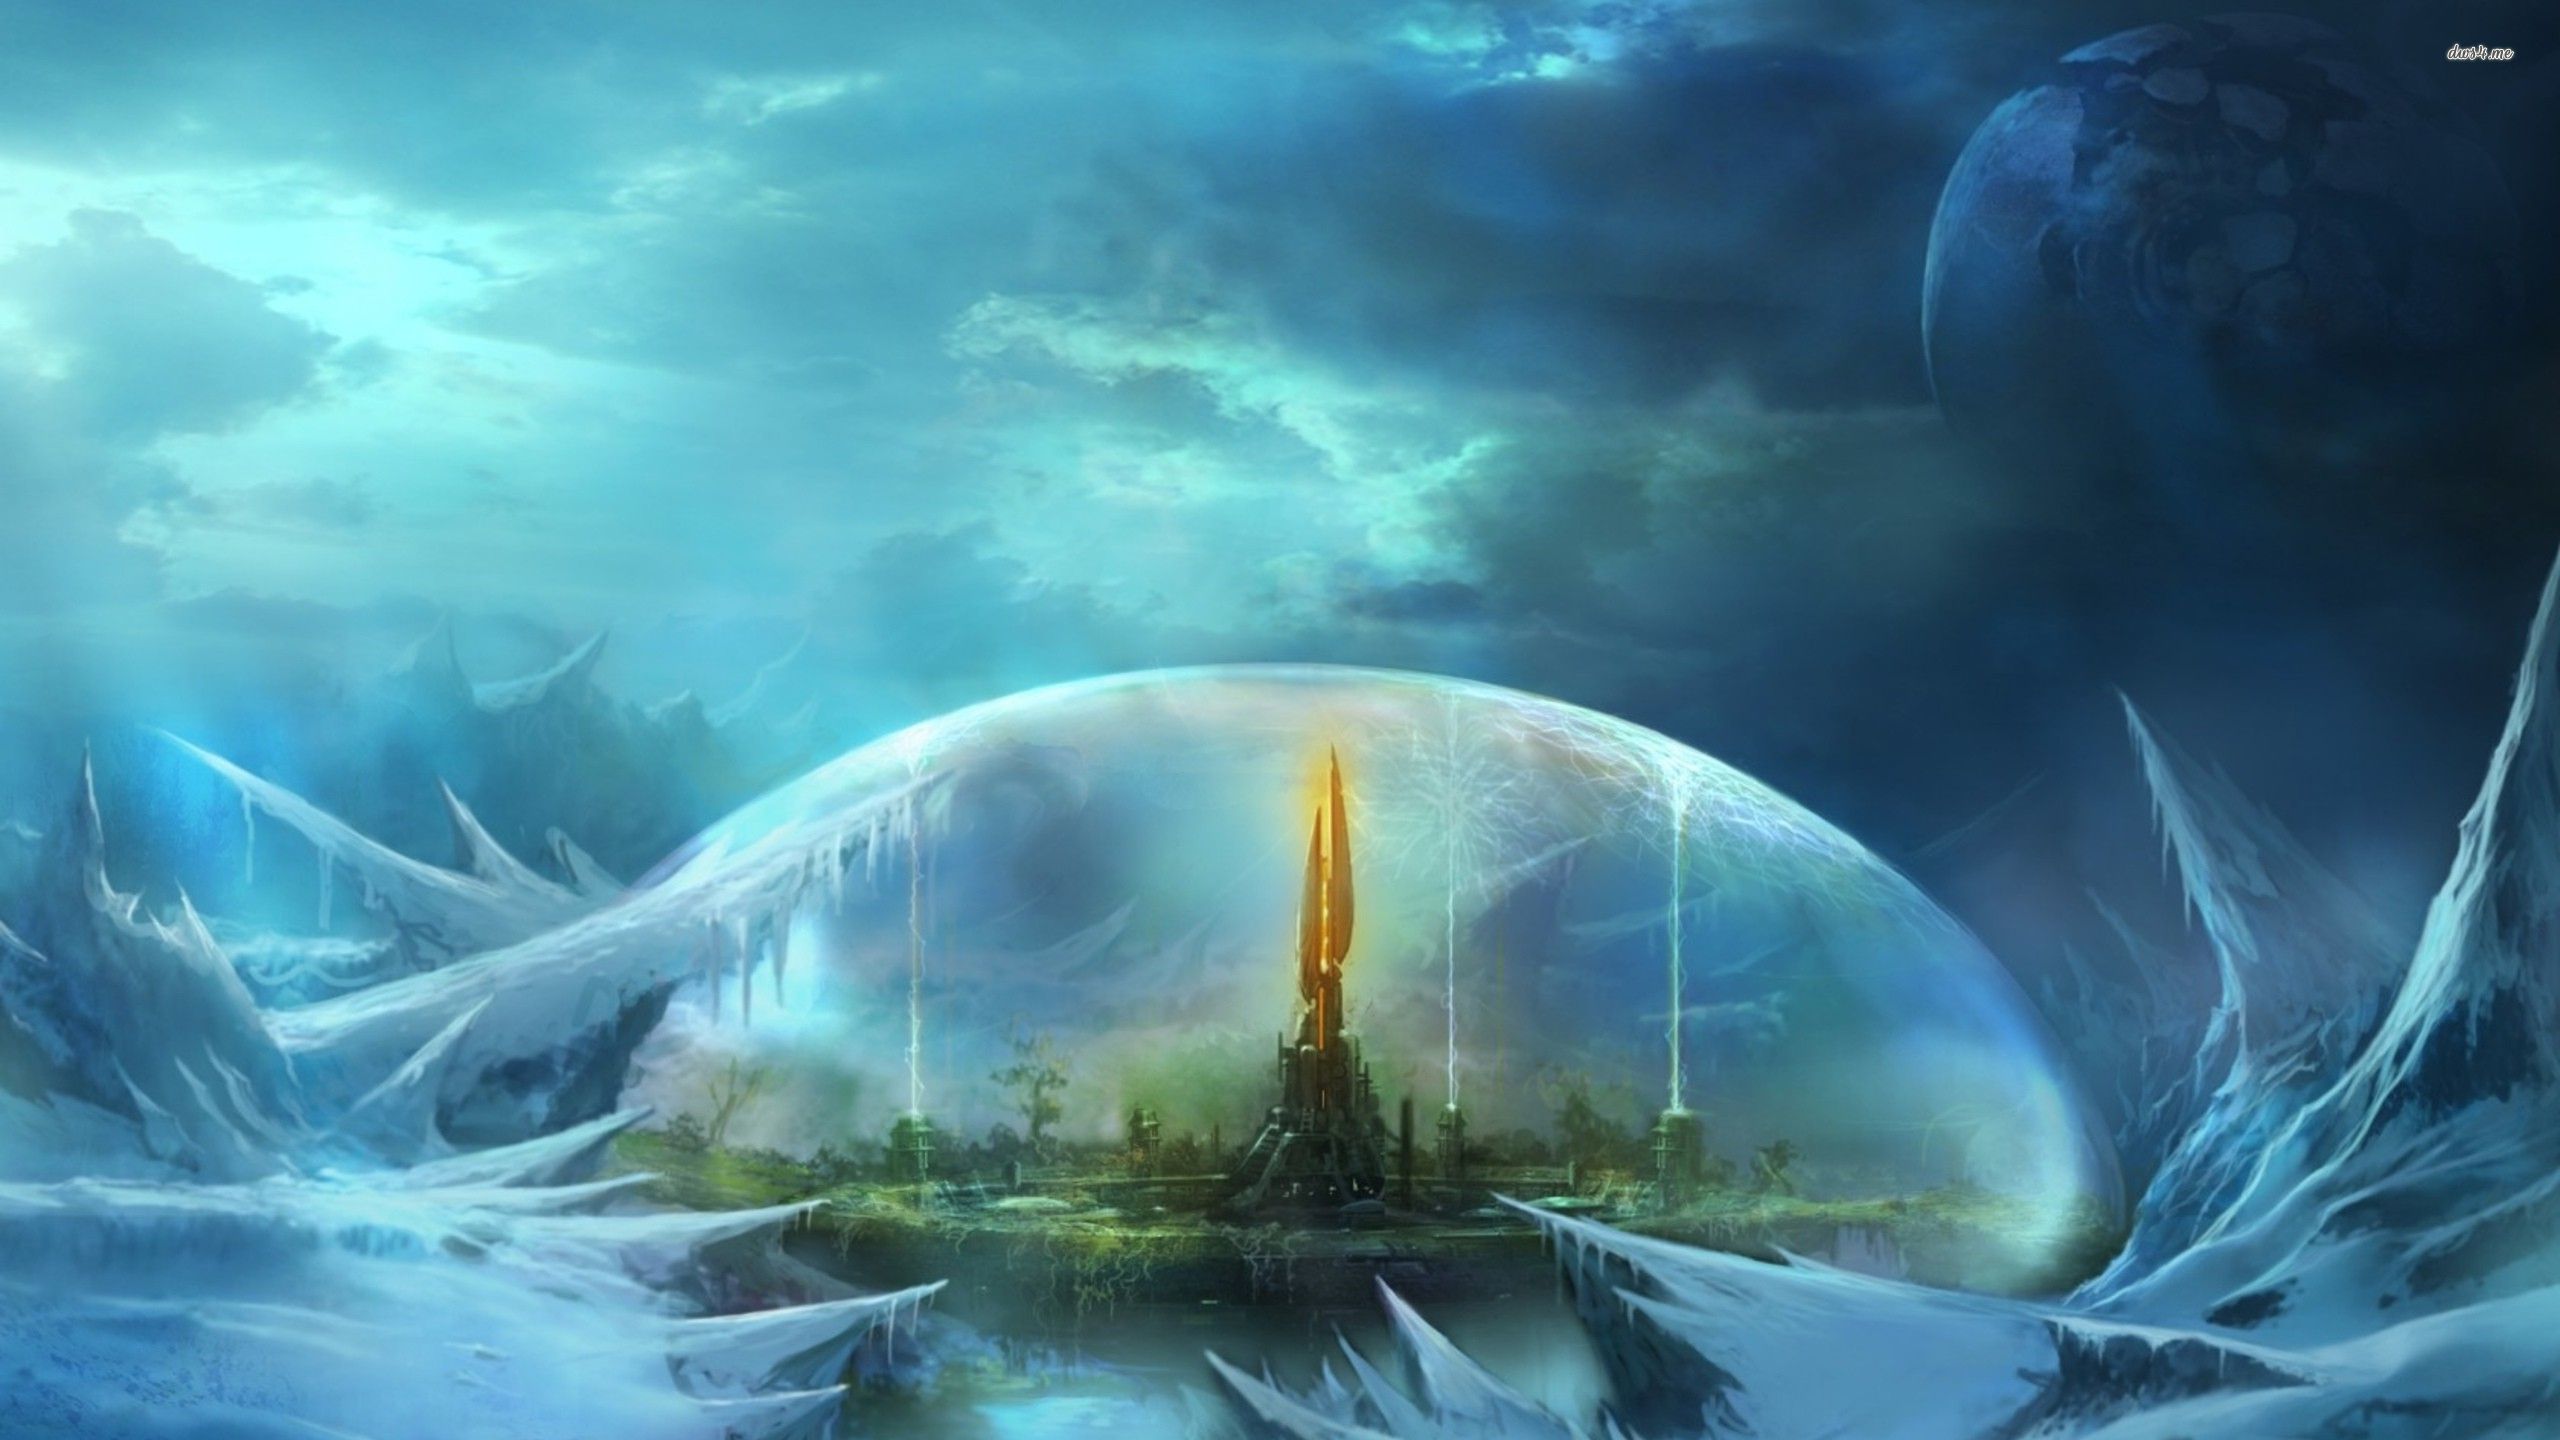 City under a protective dome wallpaper wallpaper